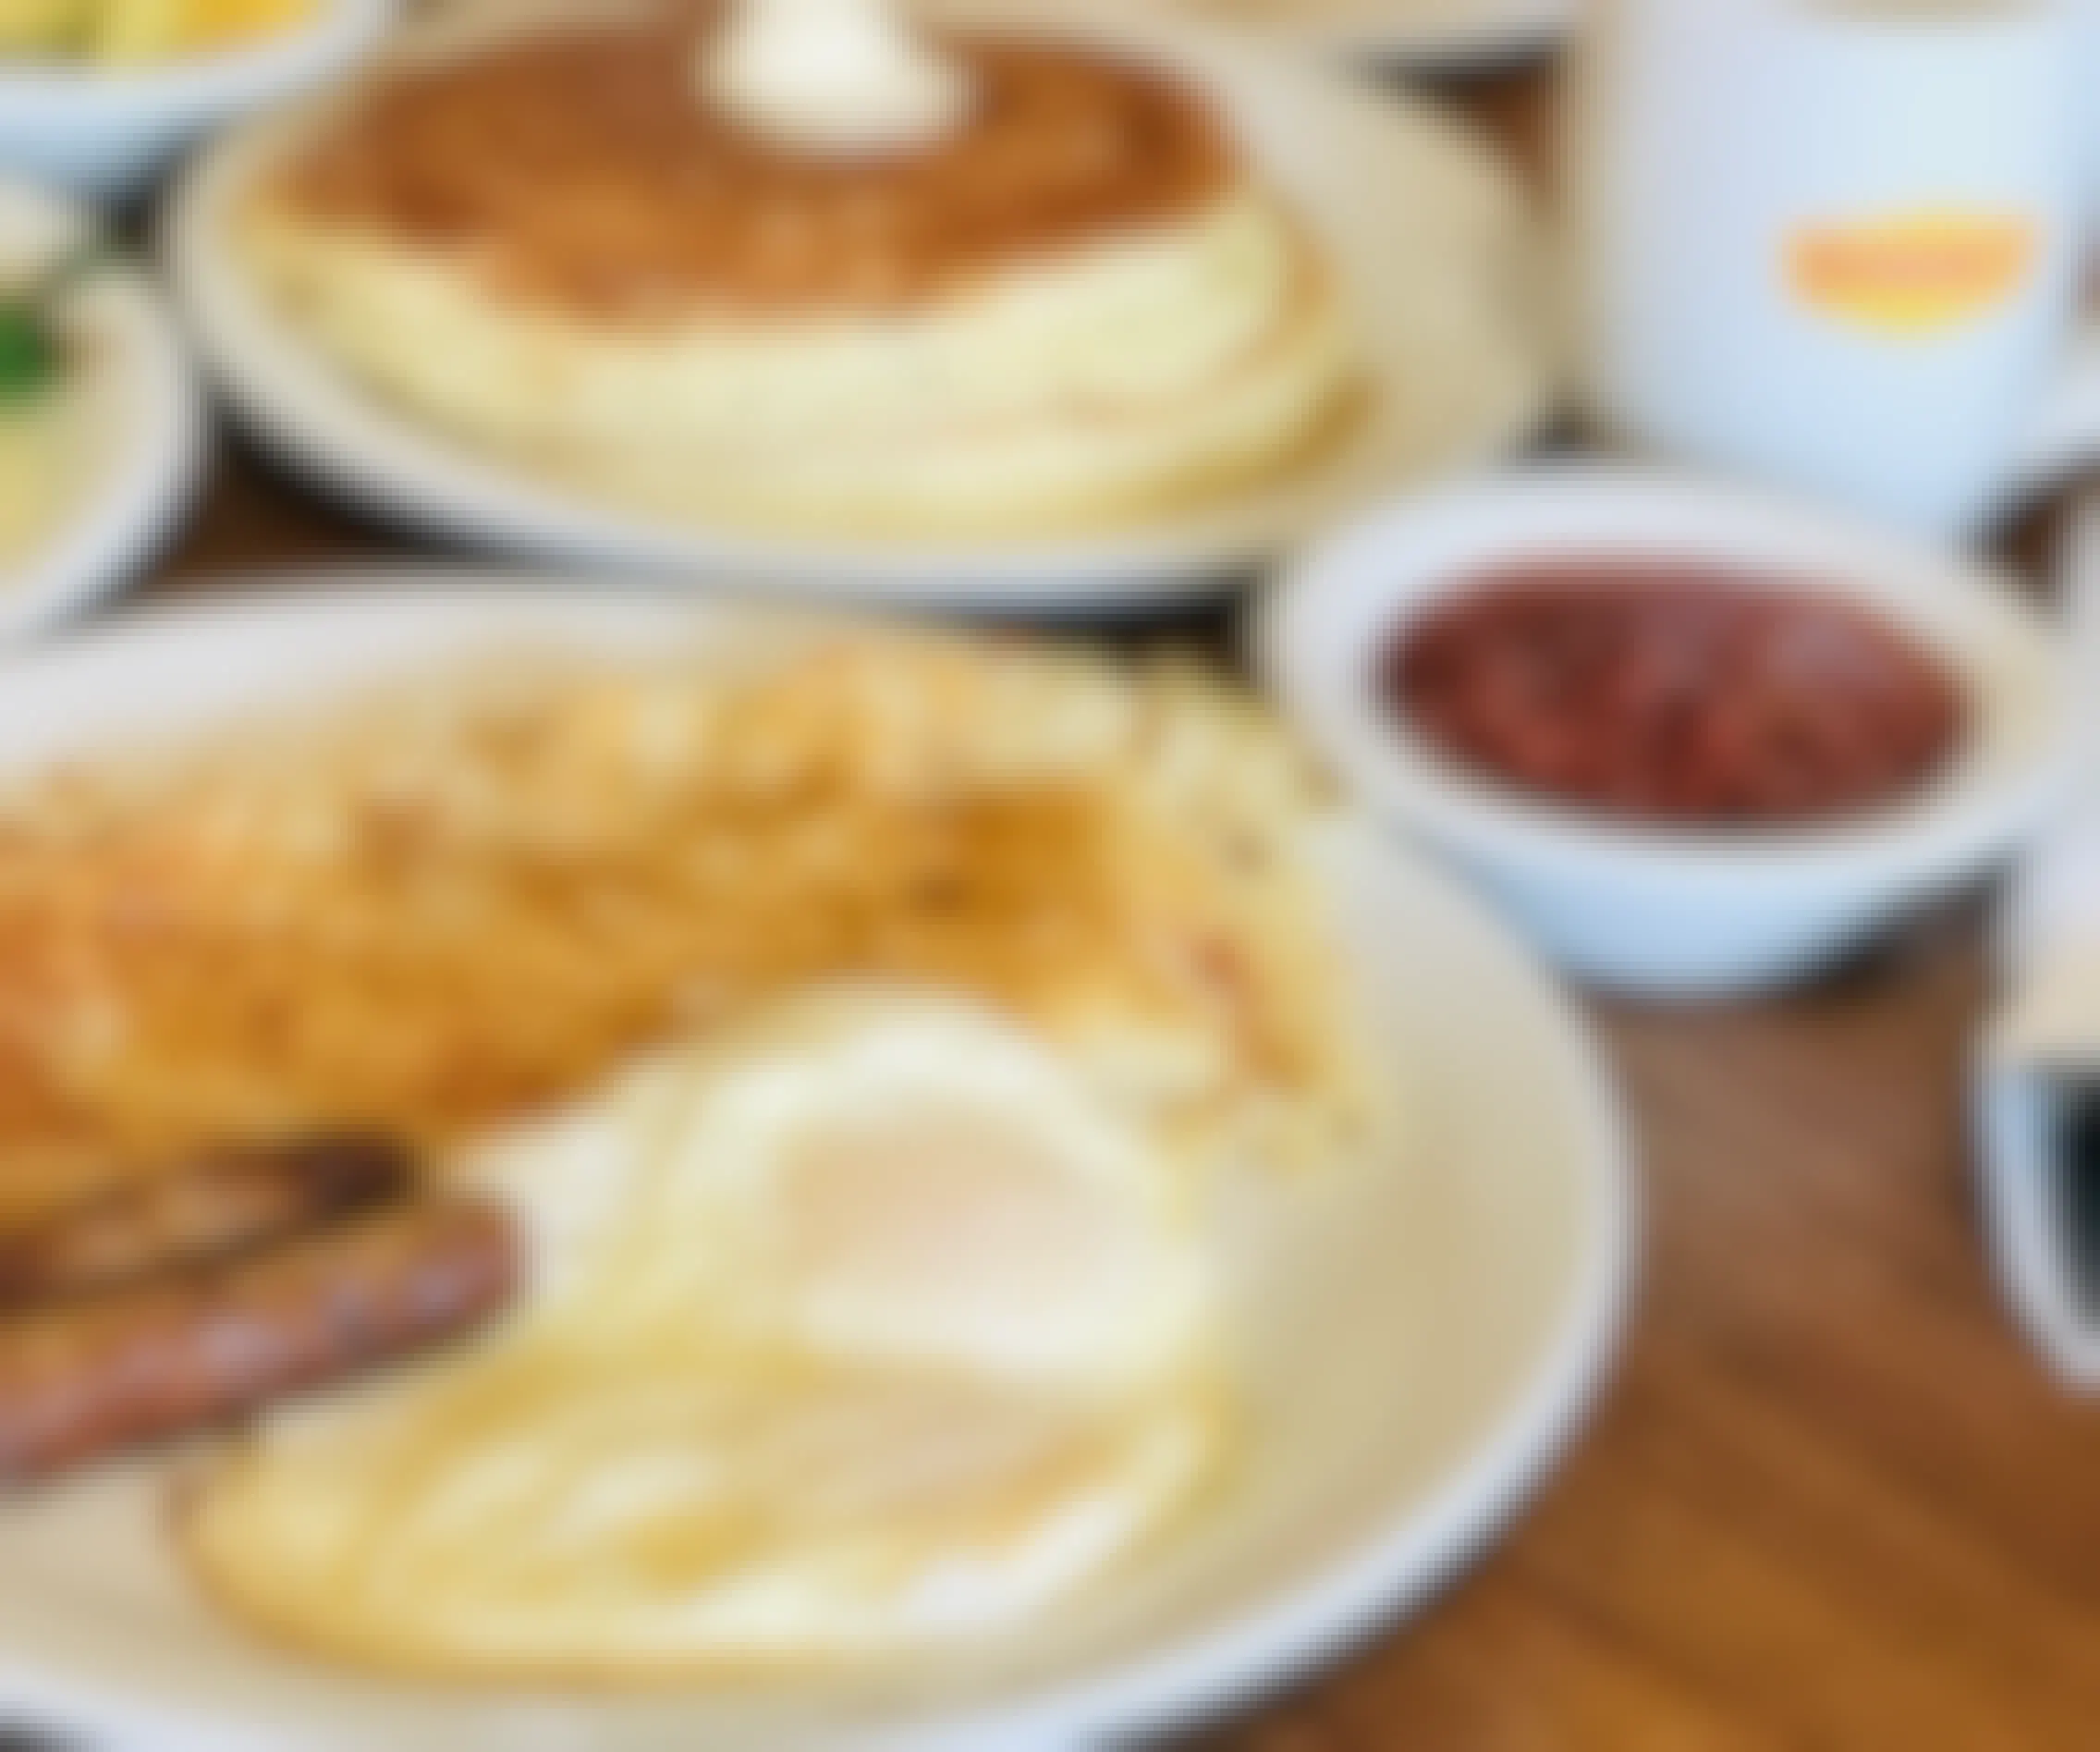 A plate of eggs, hash browns, and sausage sitting on a table next to a small bowl, another plate with pancakes, and a coffee mug with the Denny's logo.